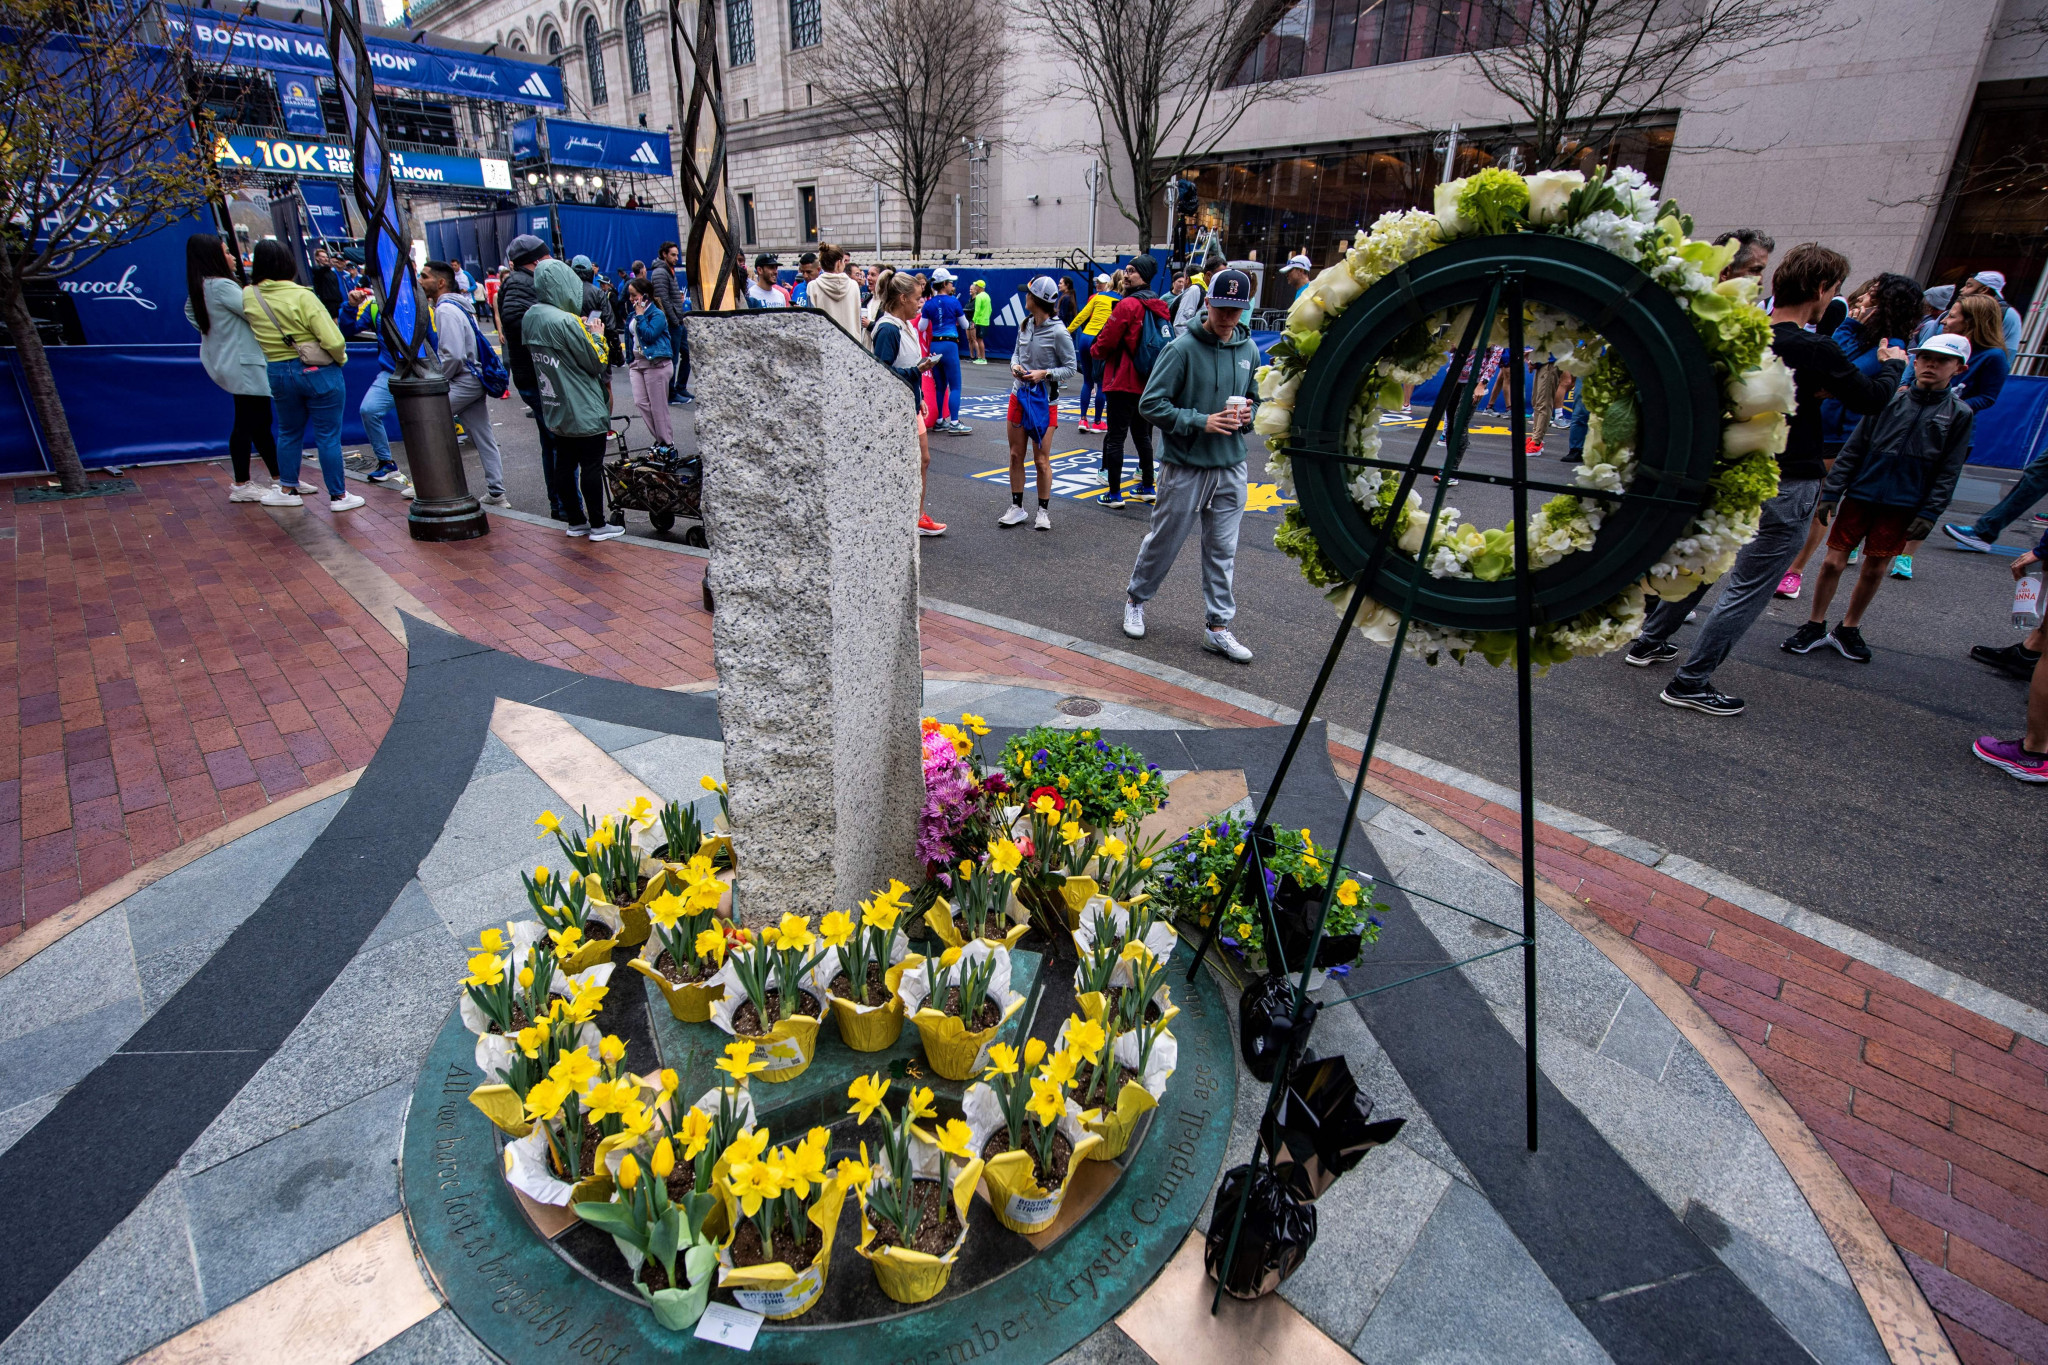 A memorial has been erected at the finish line for those killed in the bombing at the Boston Marathon 10 years ago ©Getty Images